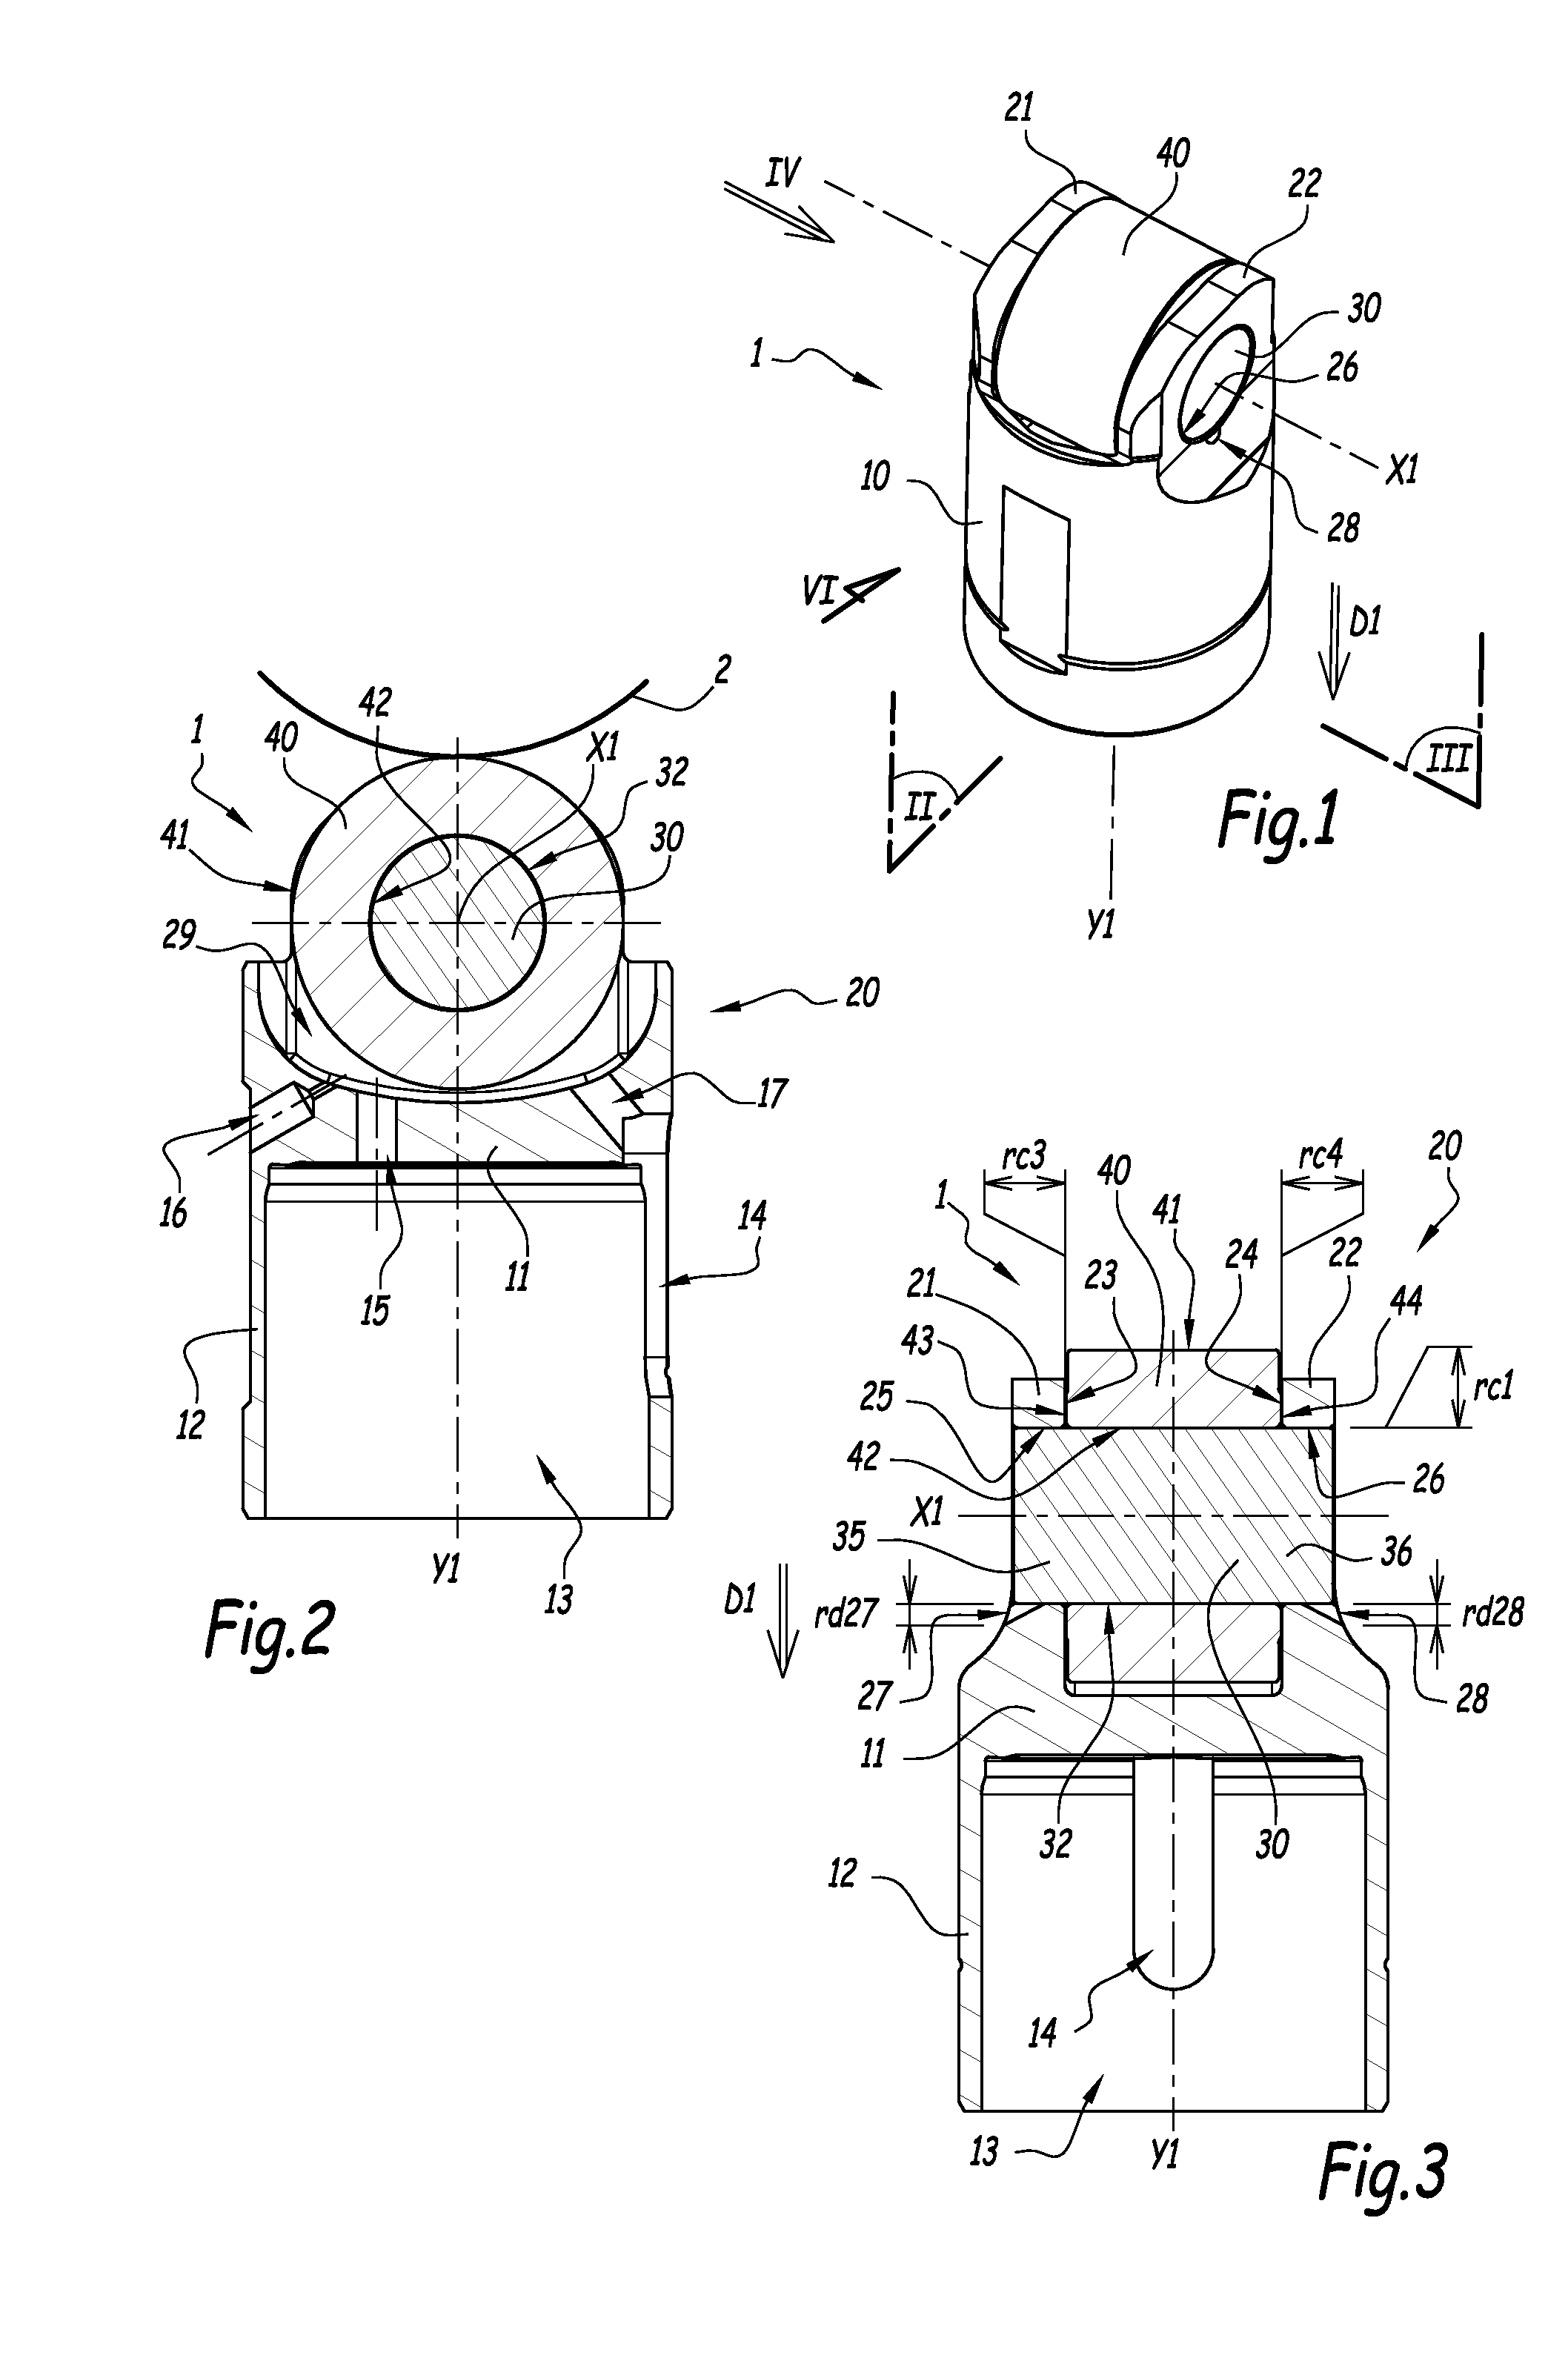 Method for manufacturing a roller, adapted to equip a mechanical system forming a cam follower or a rocker arm